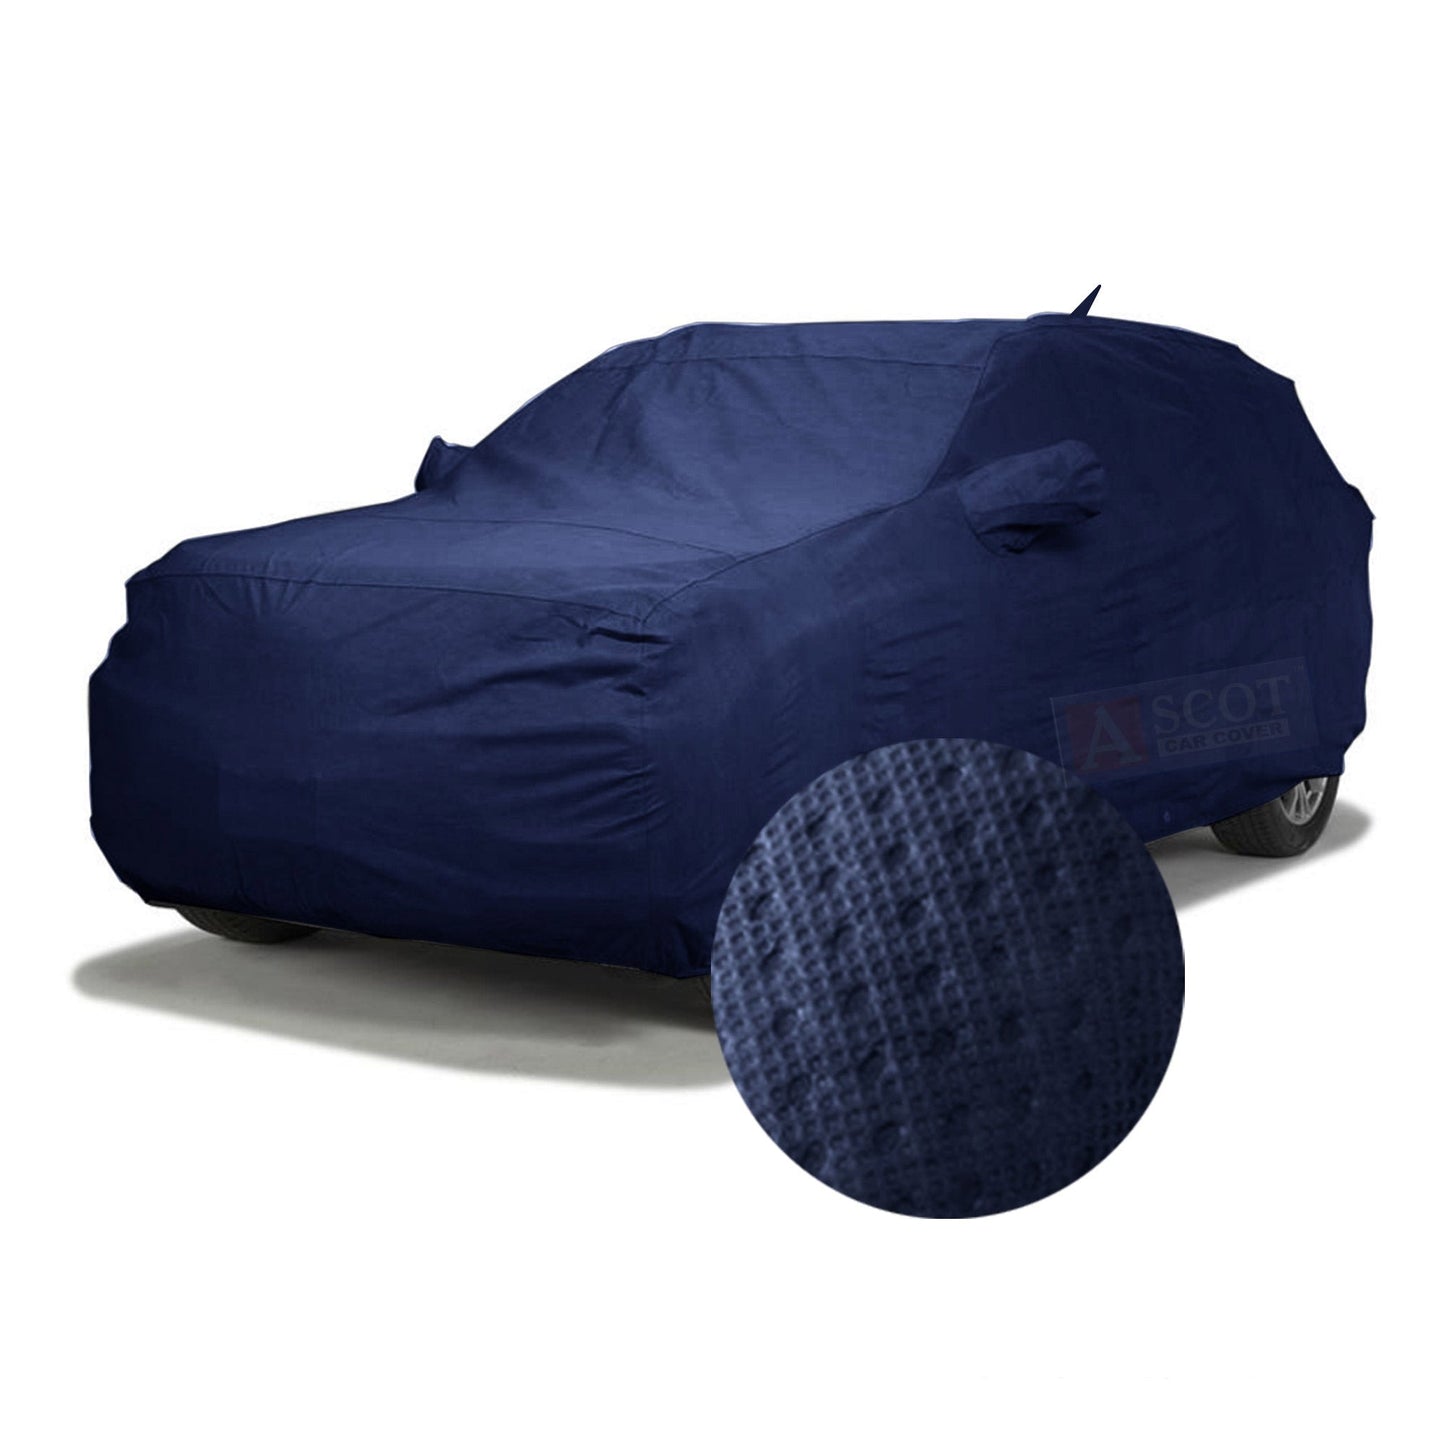 Ascot Hyundai Elite i20 Car Cover Waterproof 2014-2020 Model with Mirror & Antenna Pockets 3 Layers Custom-Fit All Weather Heat Resistant UV Proof